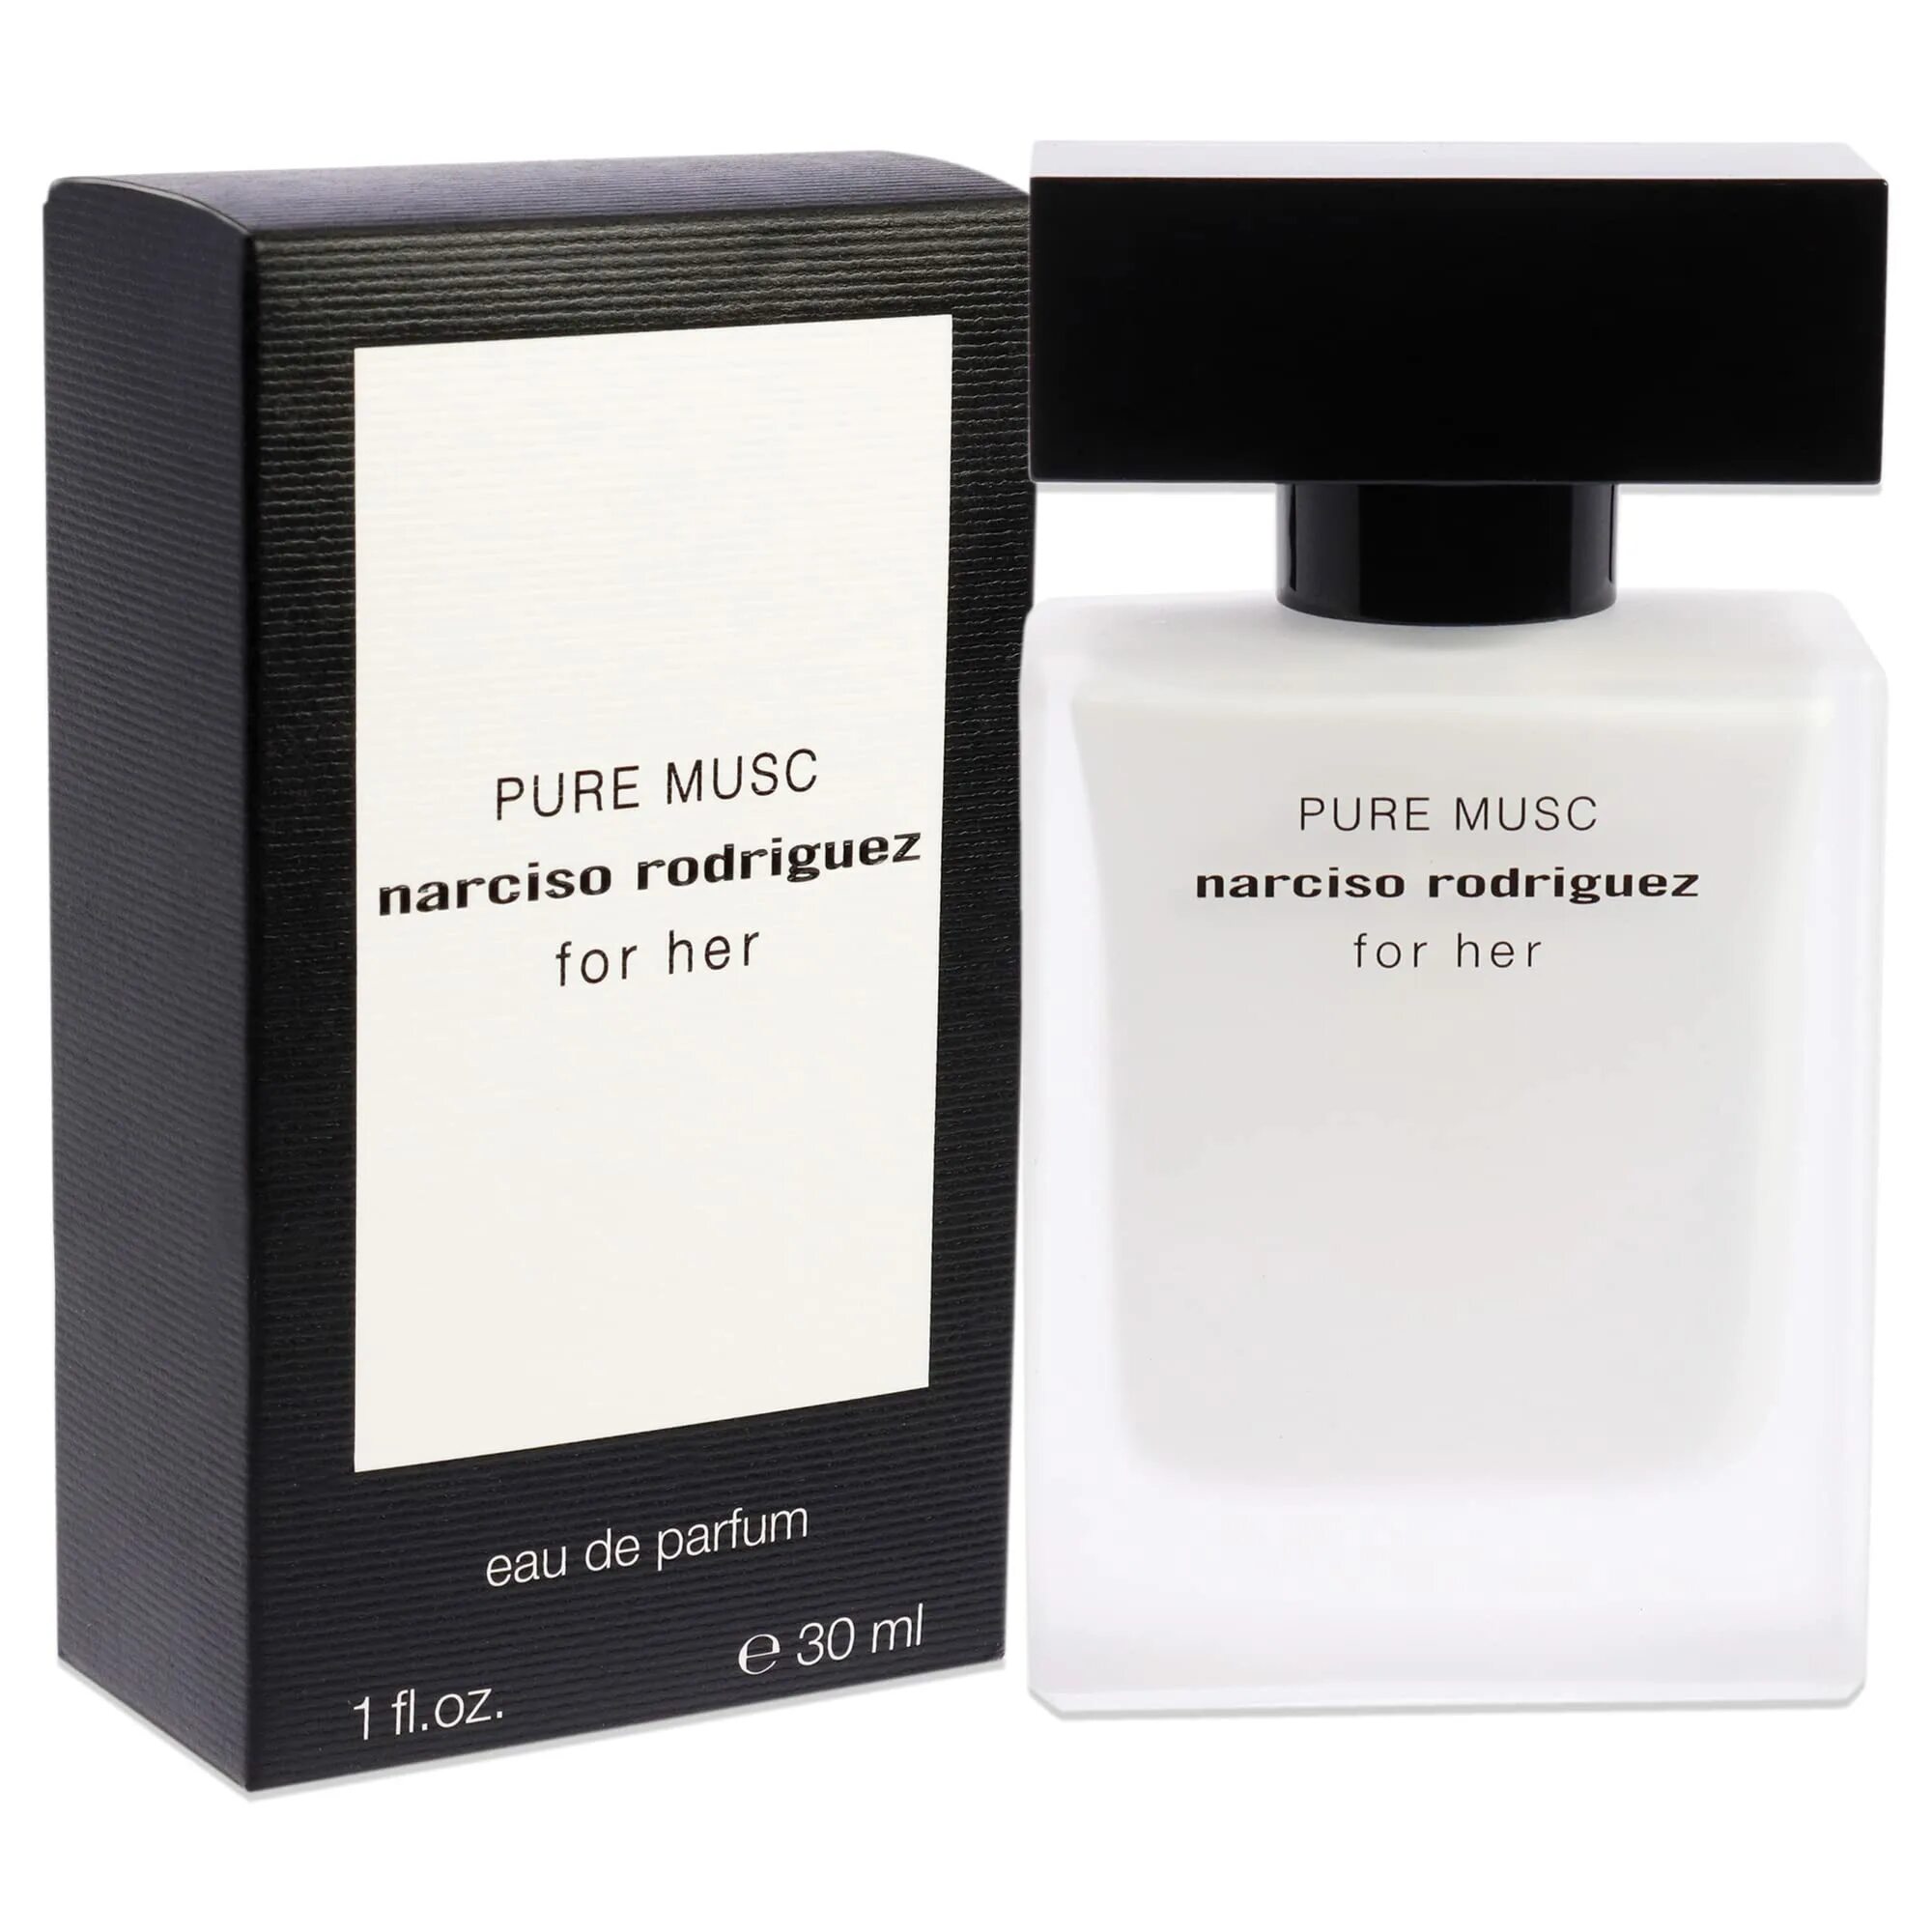 Narciso Rodriguez Pure Musk. Нарциссо Родригес Pure Musk for her набор. Narciso Rodriguez Pure Musk for her Eau de Parfum. Narciso Rodriguez Парфюм мокап. Narciso rodriguez musc купить